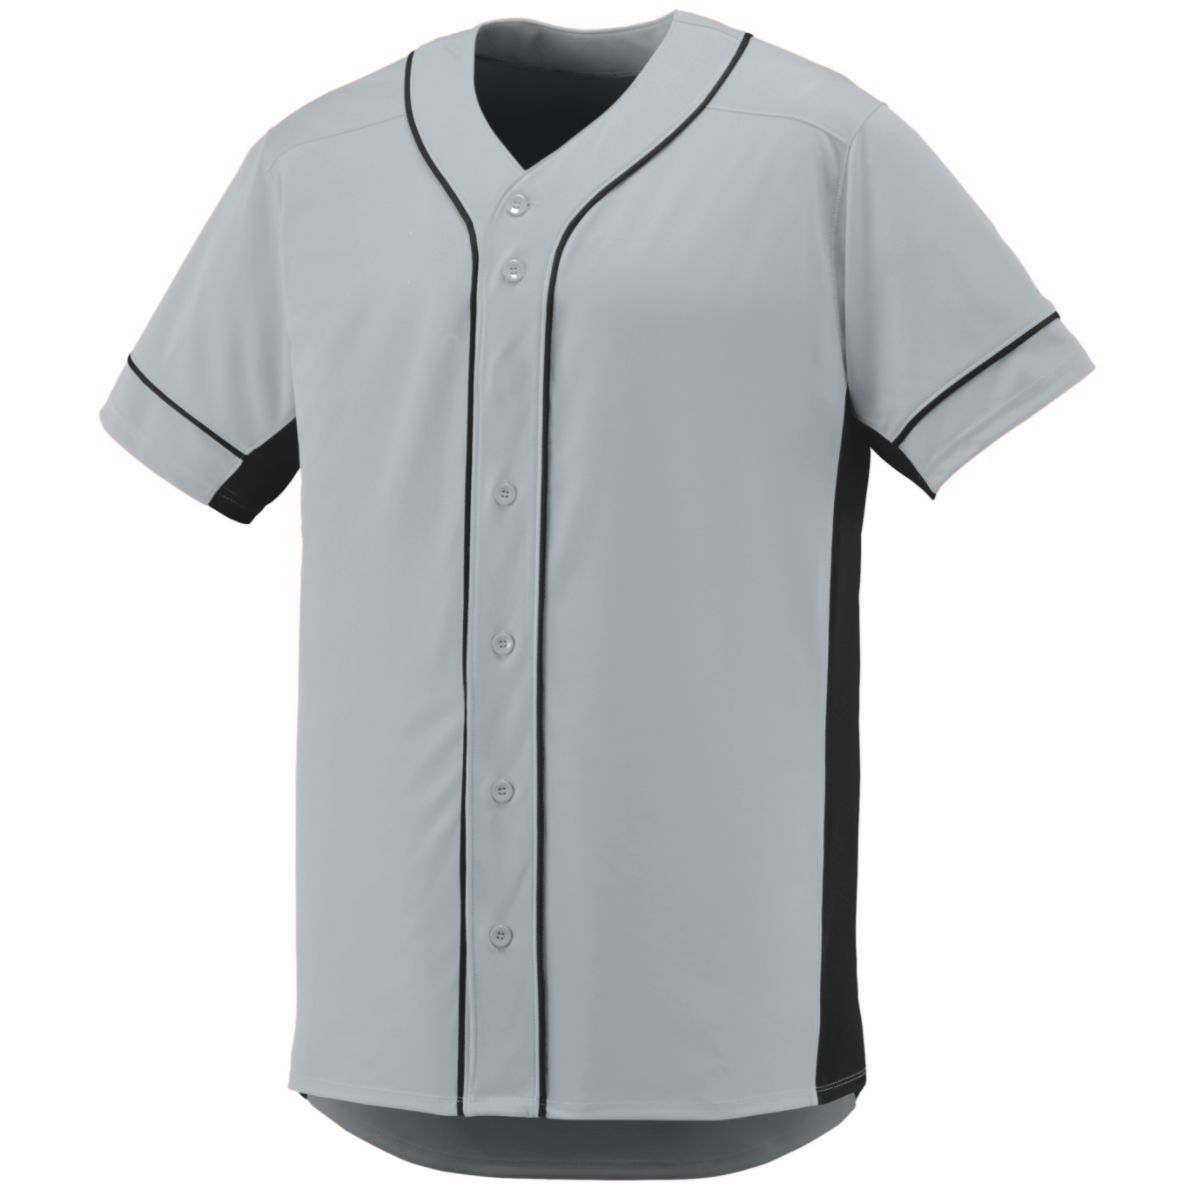 Augusta Sportswear Slugger Jersey in Silver/Black  -Part of the Adult, Adult-Jersey, Augusta-Products, Baseball, Shirts, All-Sports, All-Sports-1 product lines at KanaleyCreations.com